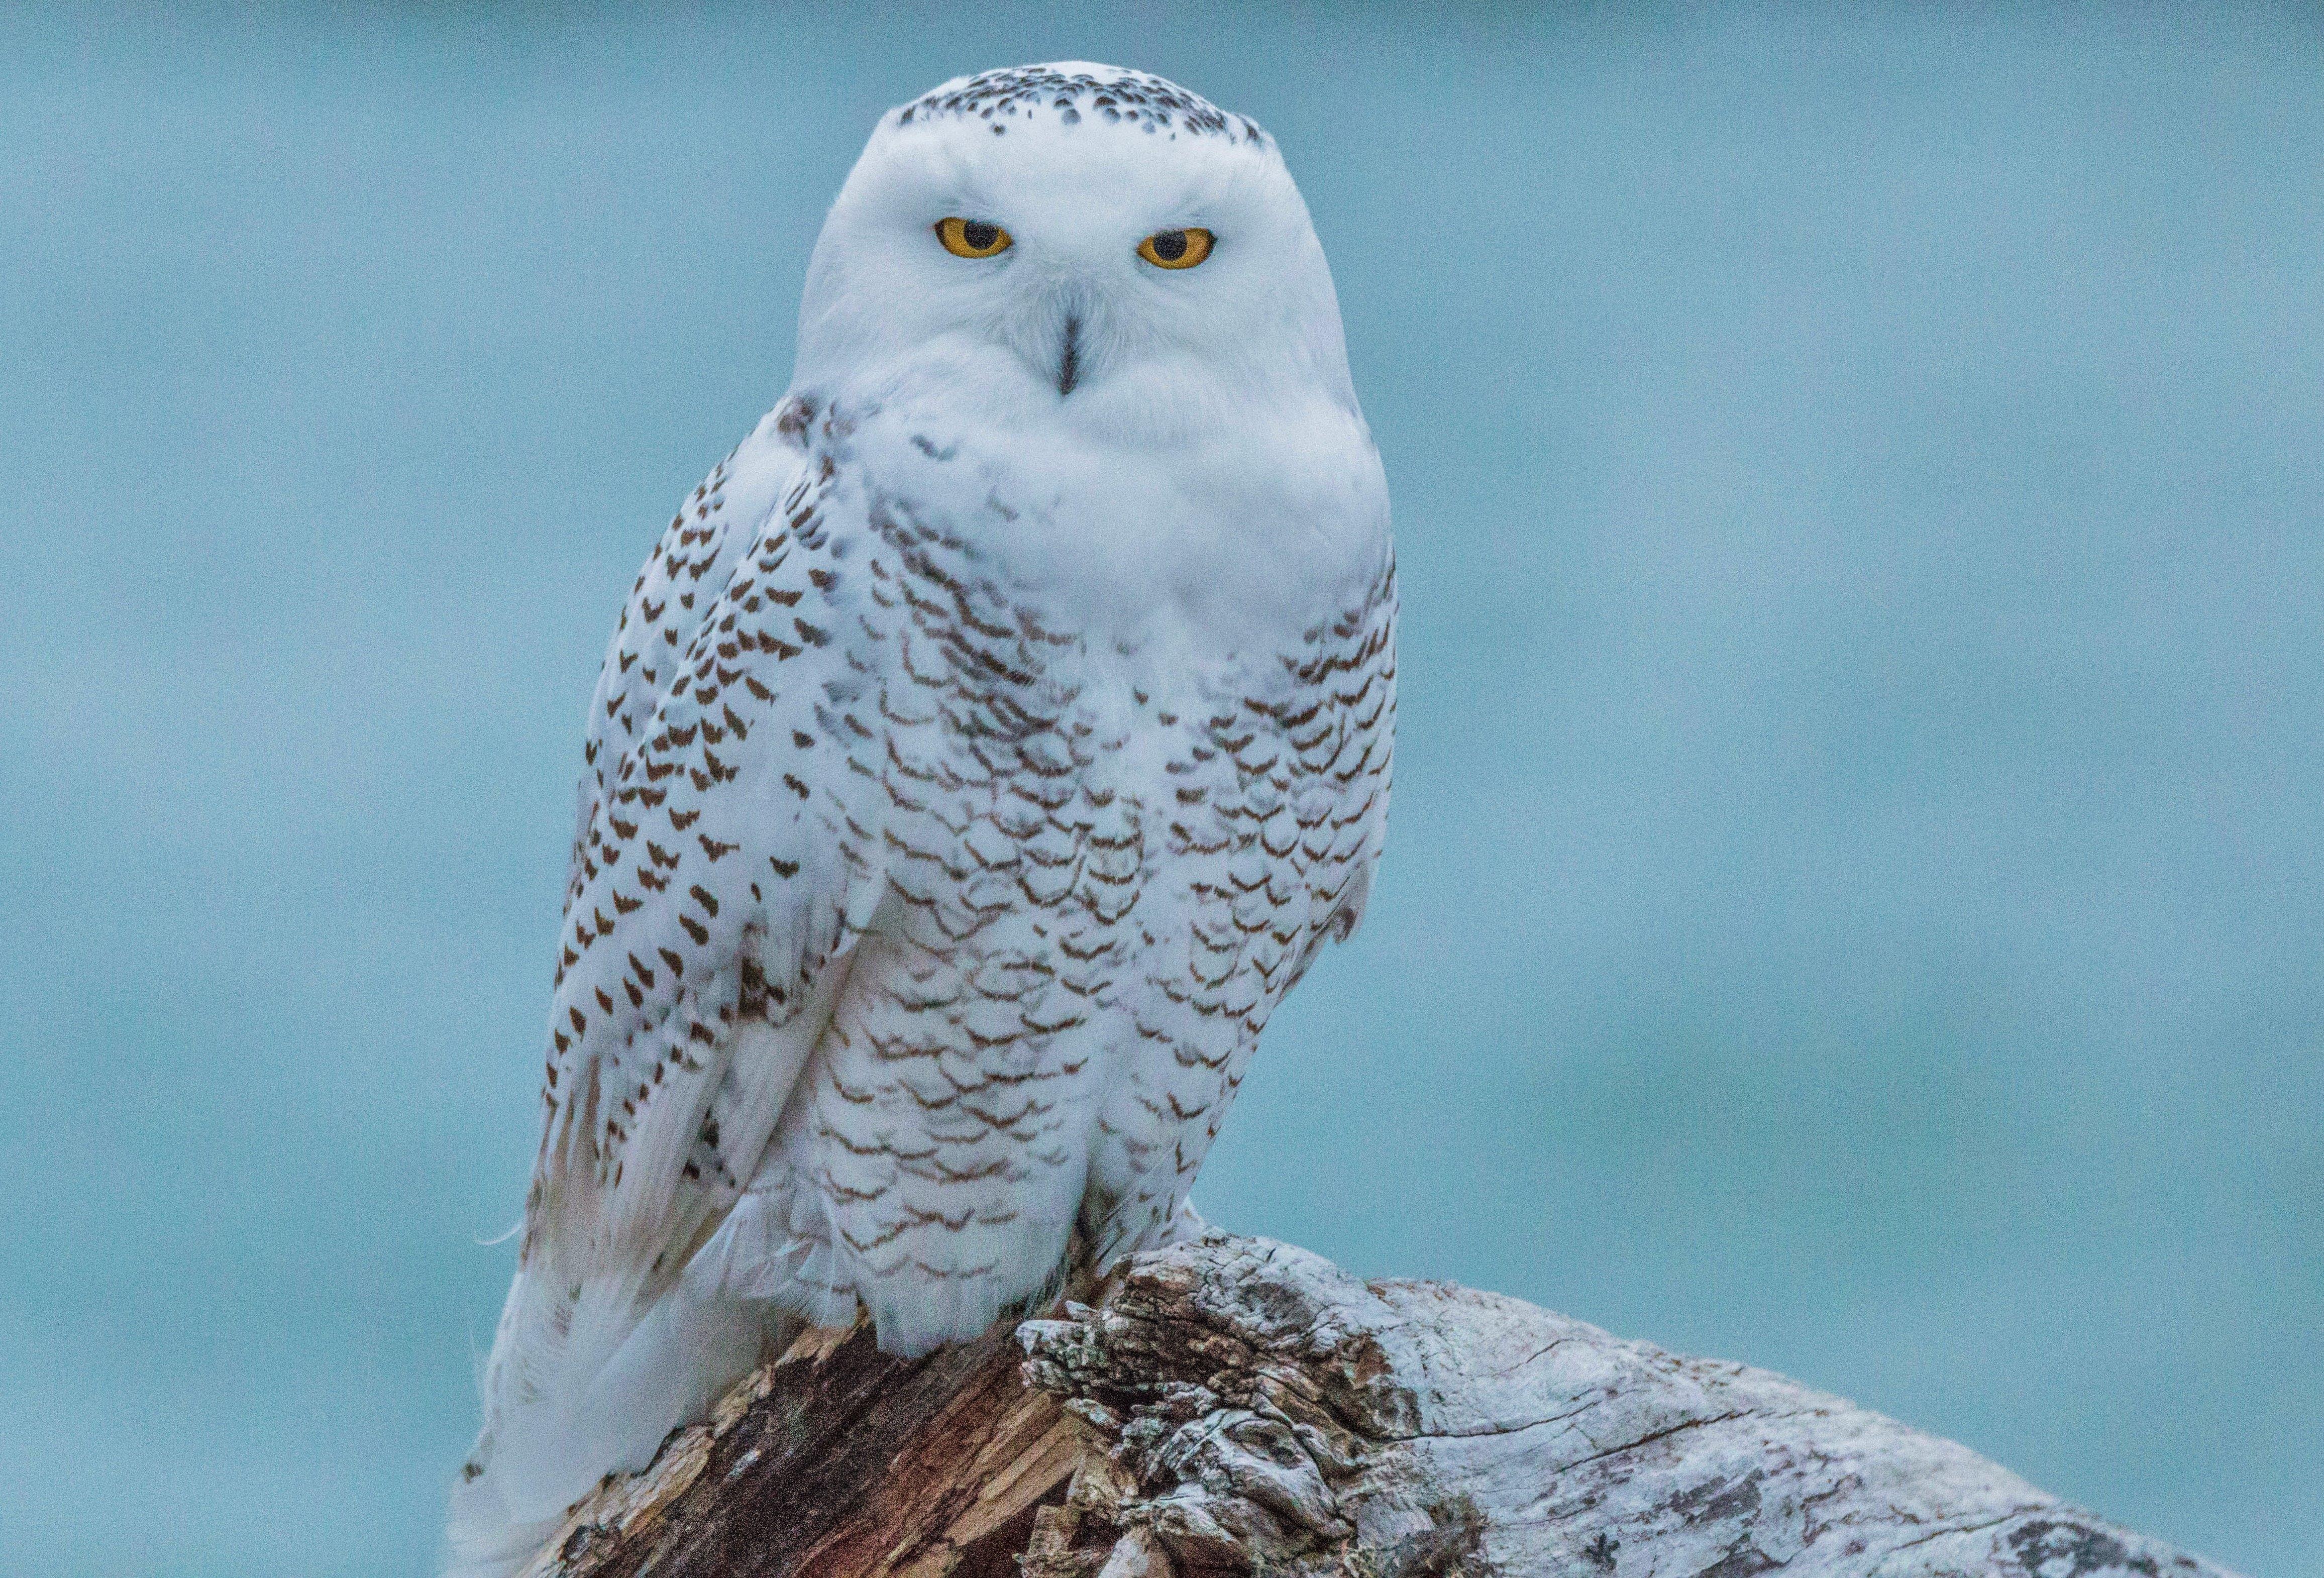 Snowy owls spotted at Presque Isle State Park - News - GoErie.com ...